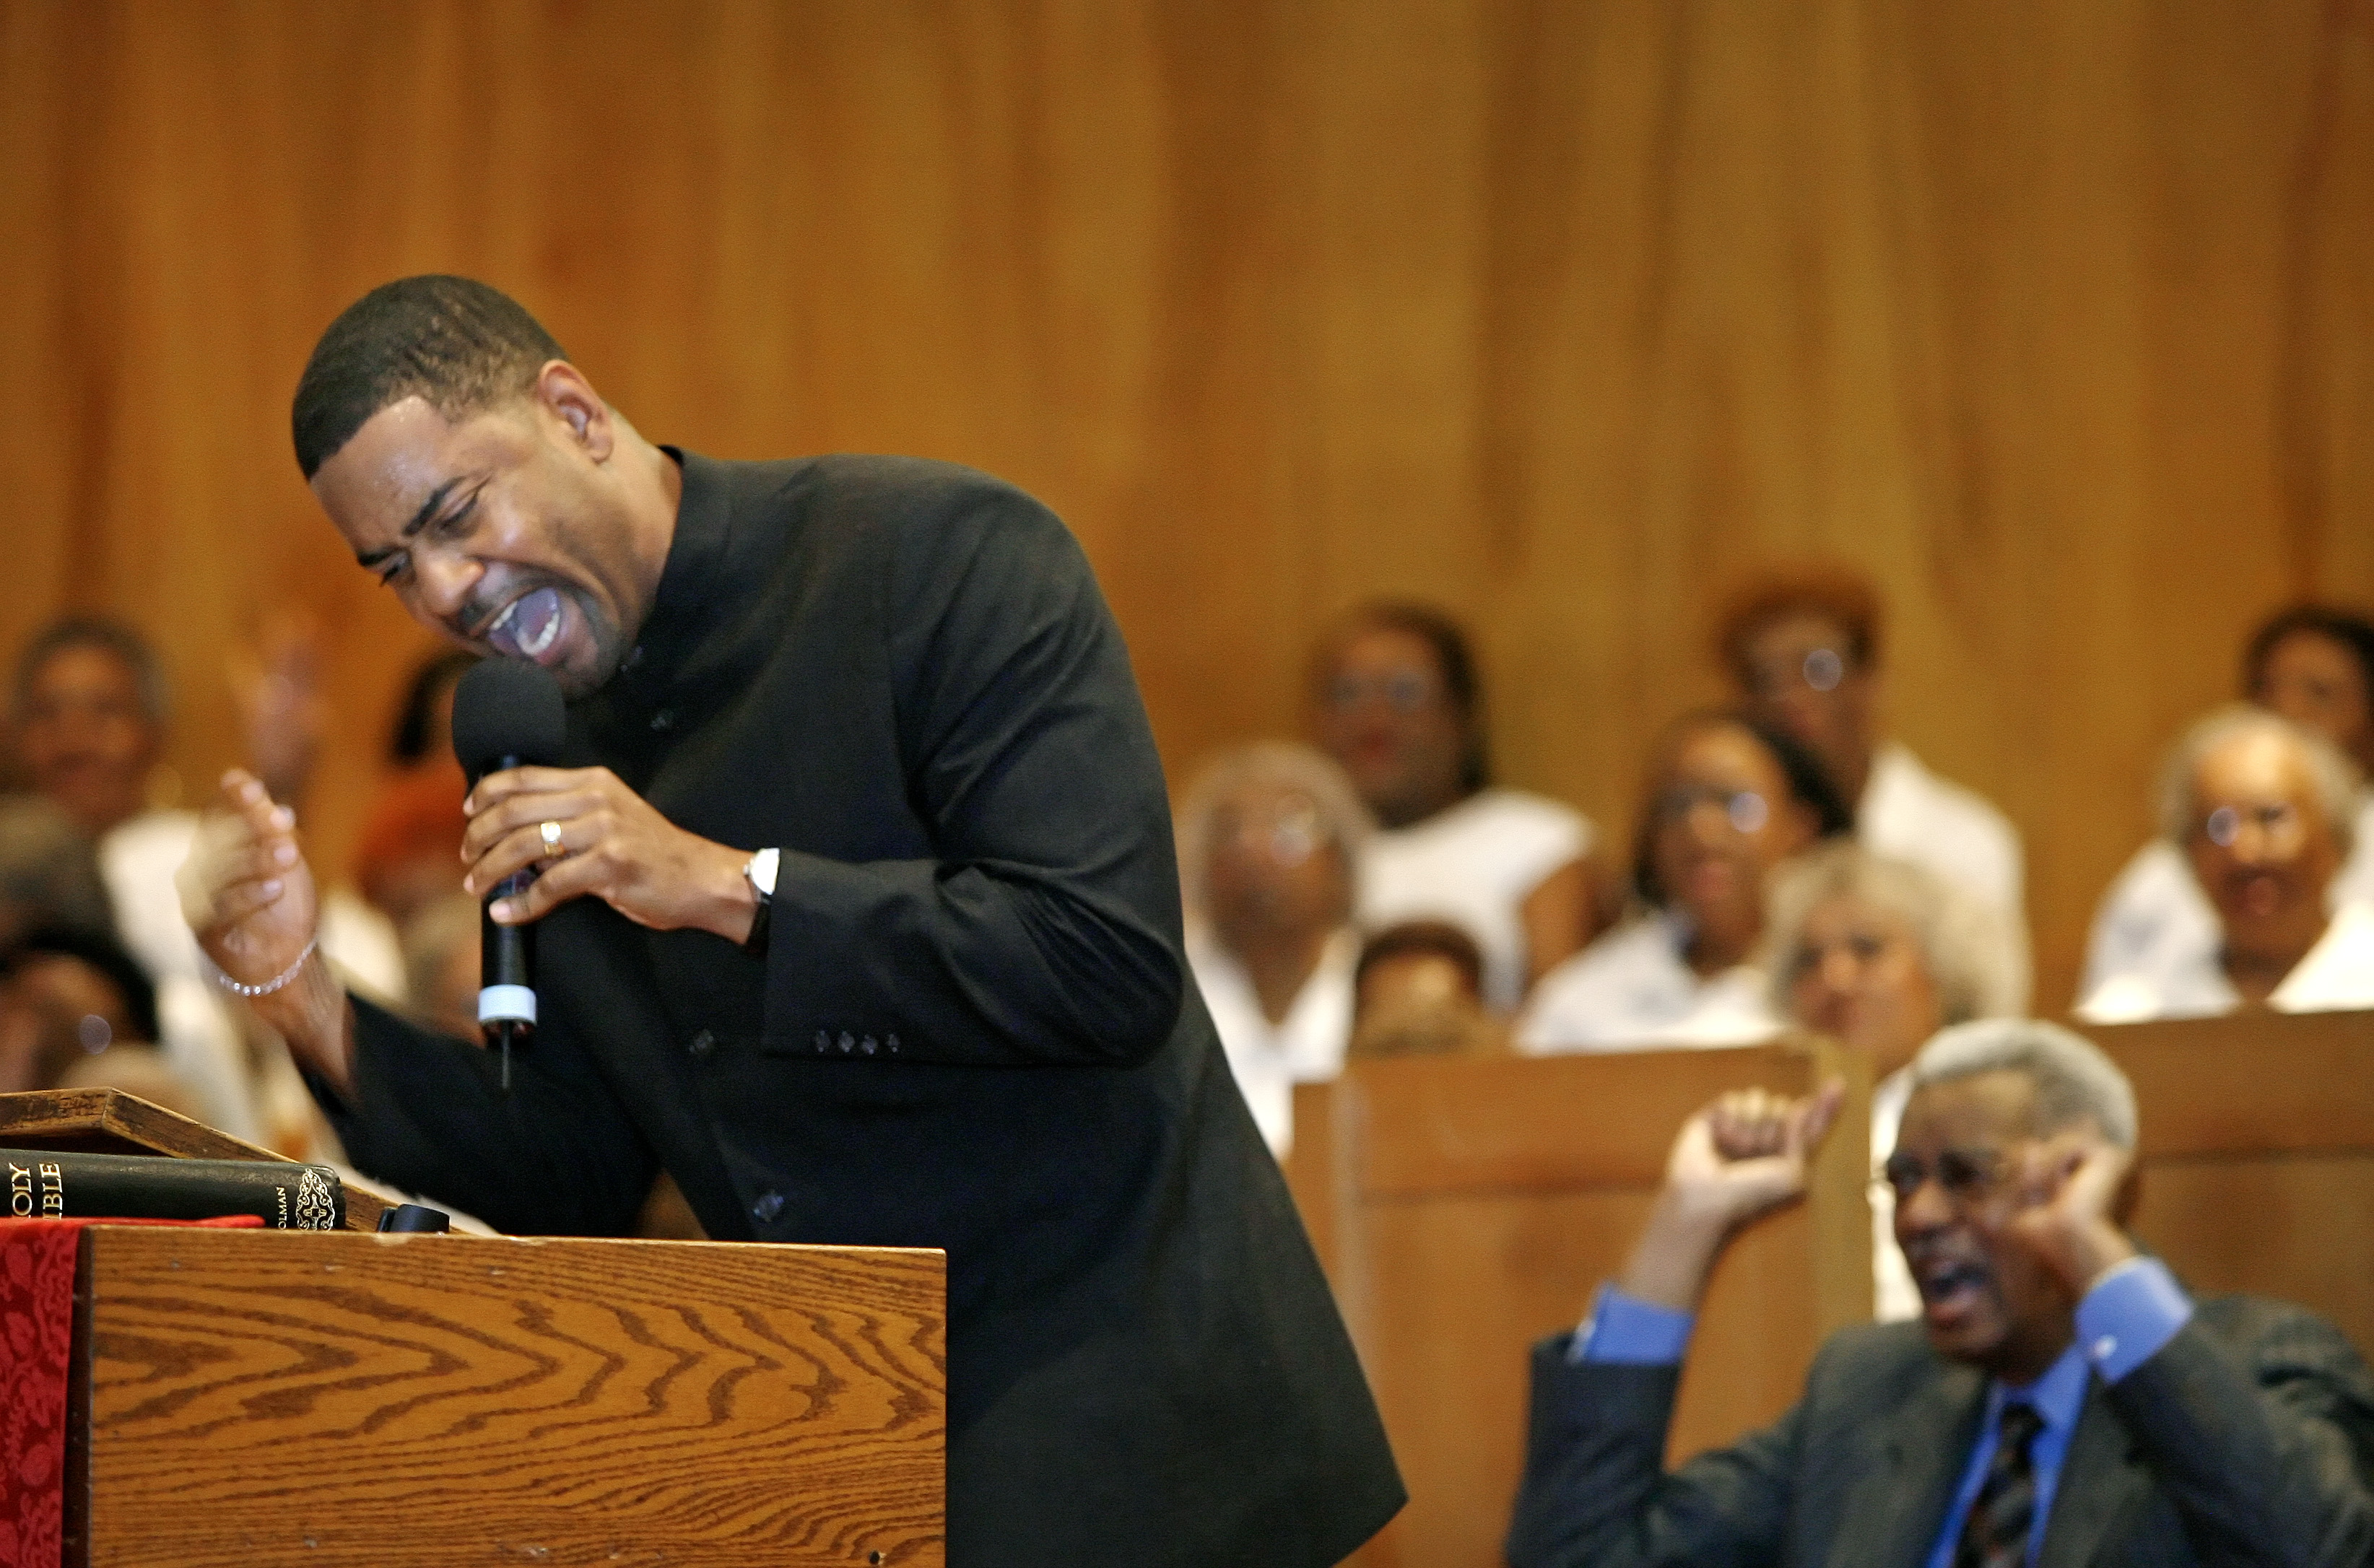 For Diana Keough Story -- Left, Rev. Otis Moss, III preaches during the annual revival at Olivet Institutional Baptist Church in Cleveland while his father, Pastor Otis Moss, Jr. sits behind him. March 21, 2007 (Lonnie Timmons III/Plain Dealer)